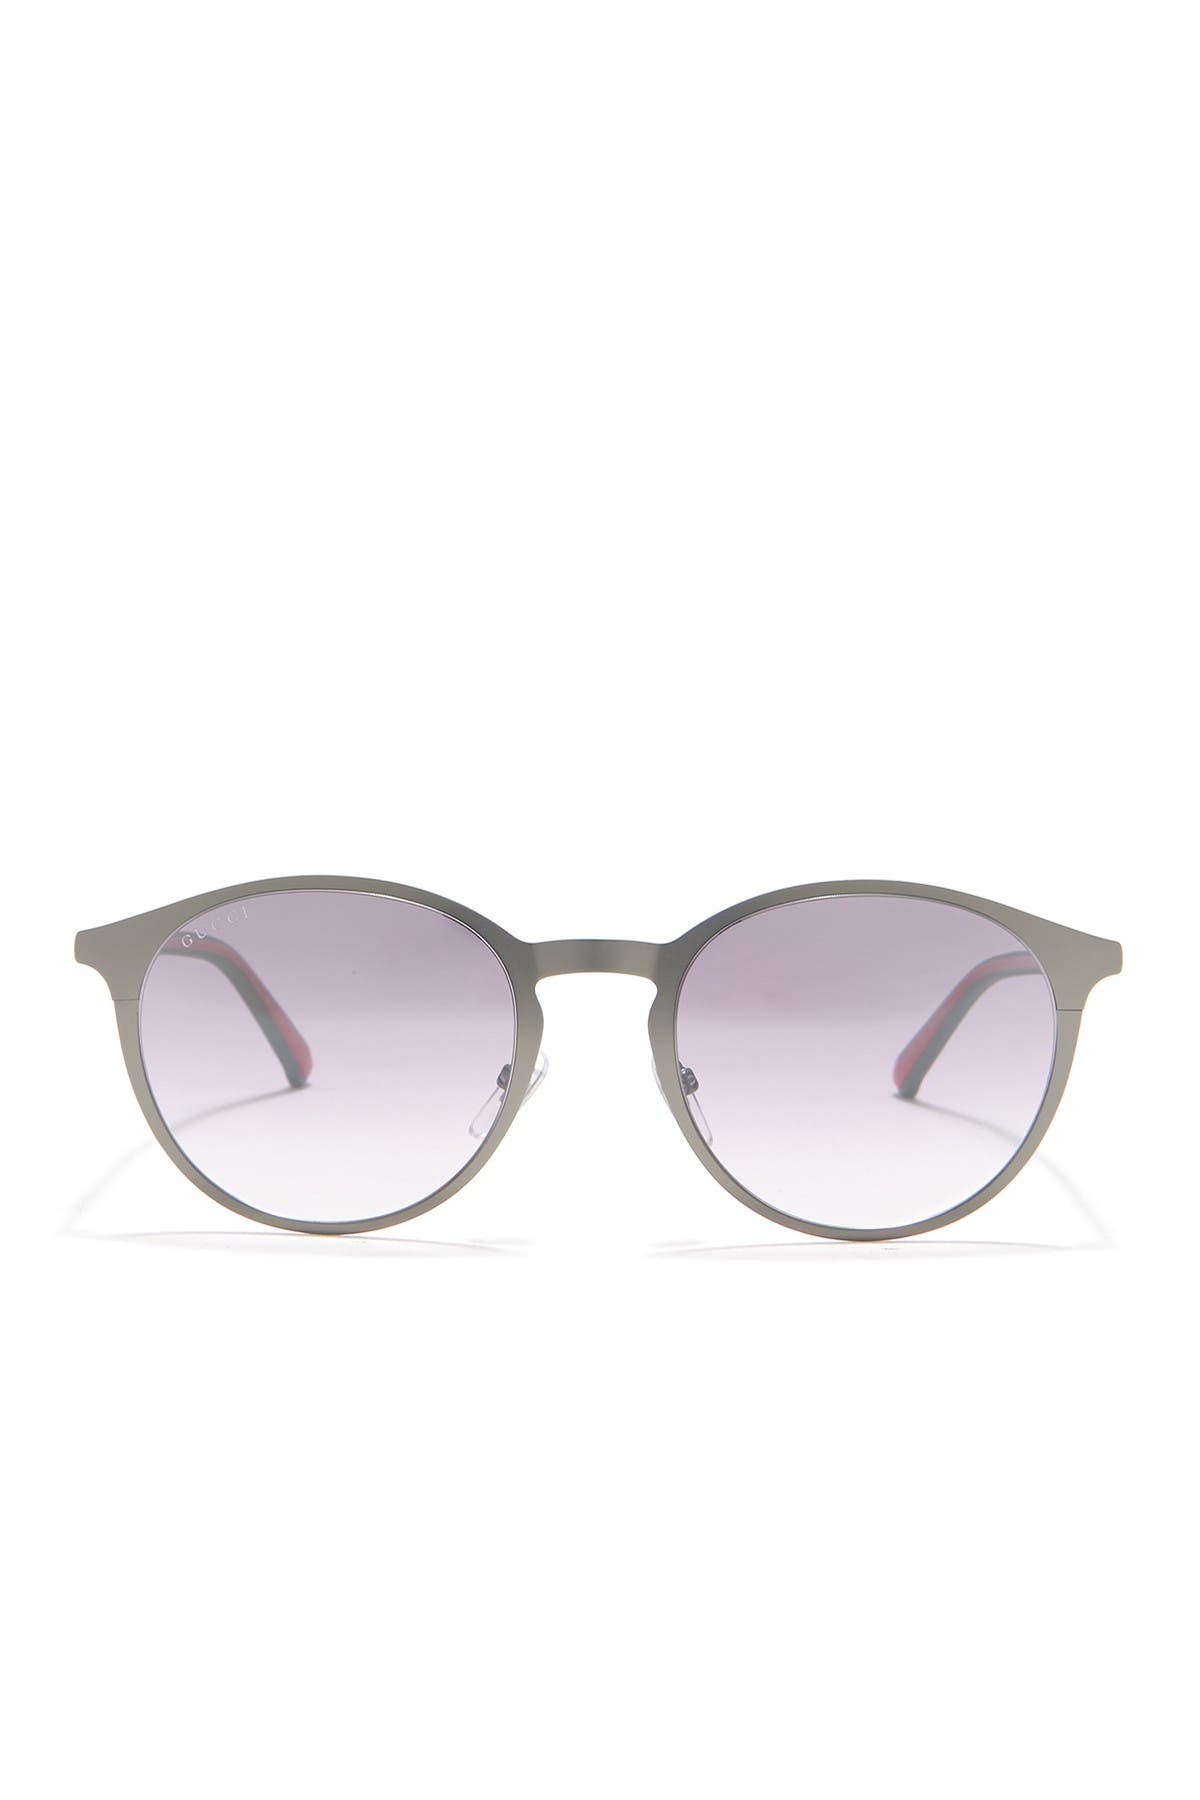 Gucci 52mm Round Sunglasses Nordstrom Rack